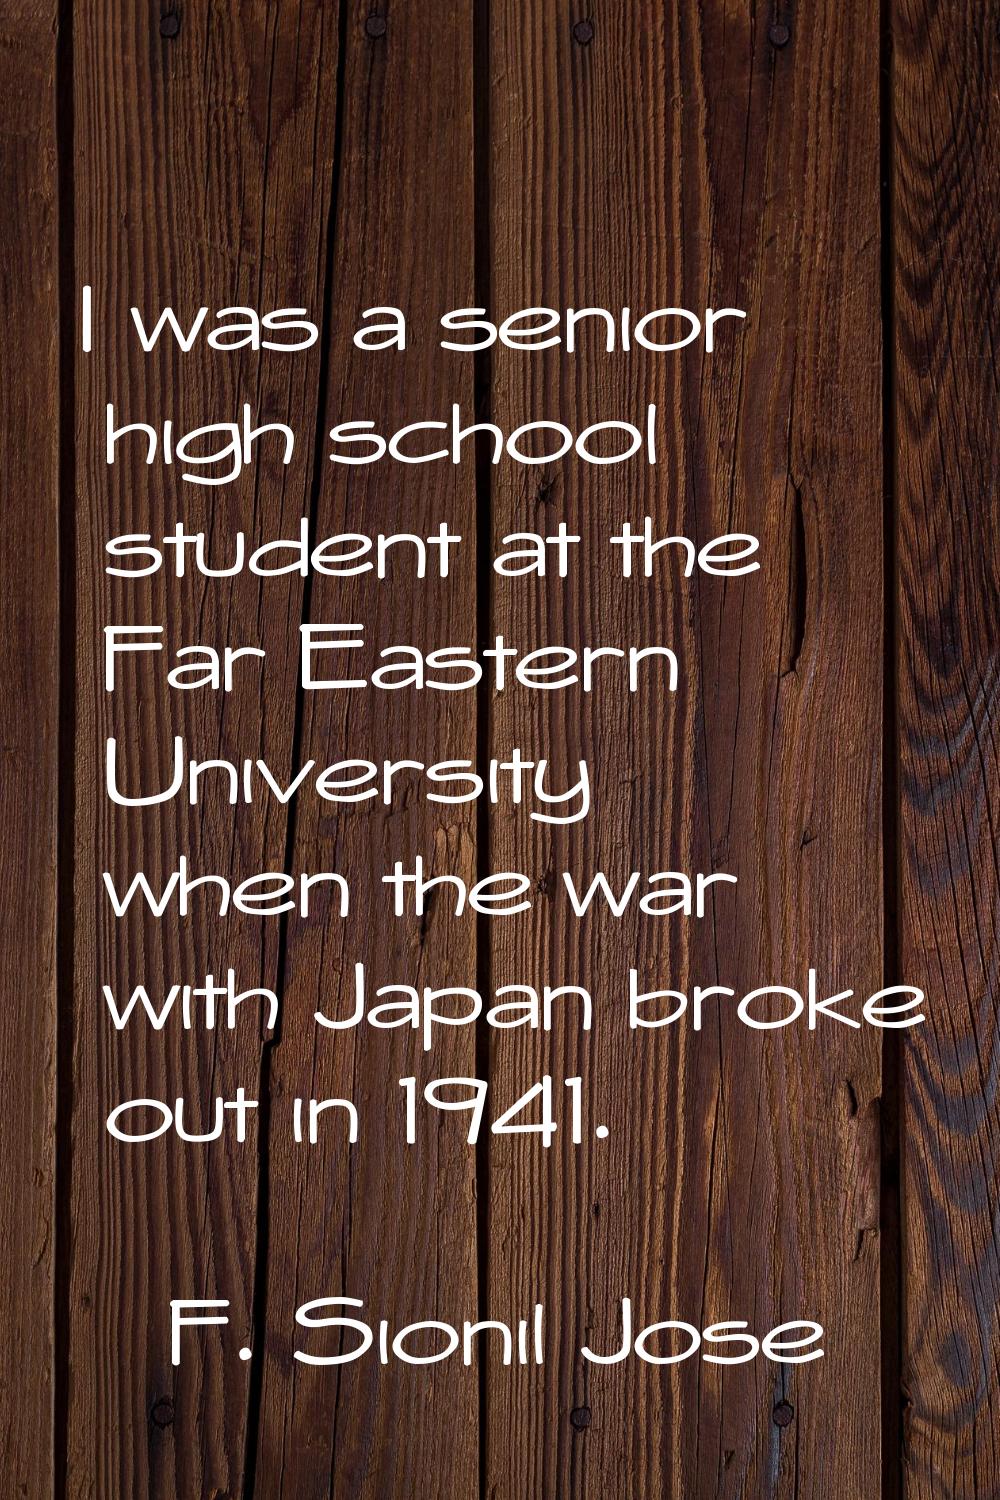 I was a senior high school student at the Far Eastern University when the war with Japan broke out 